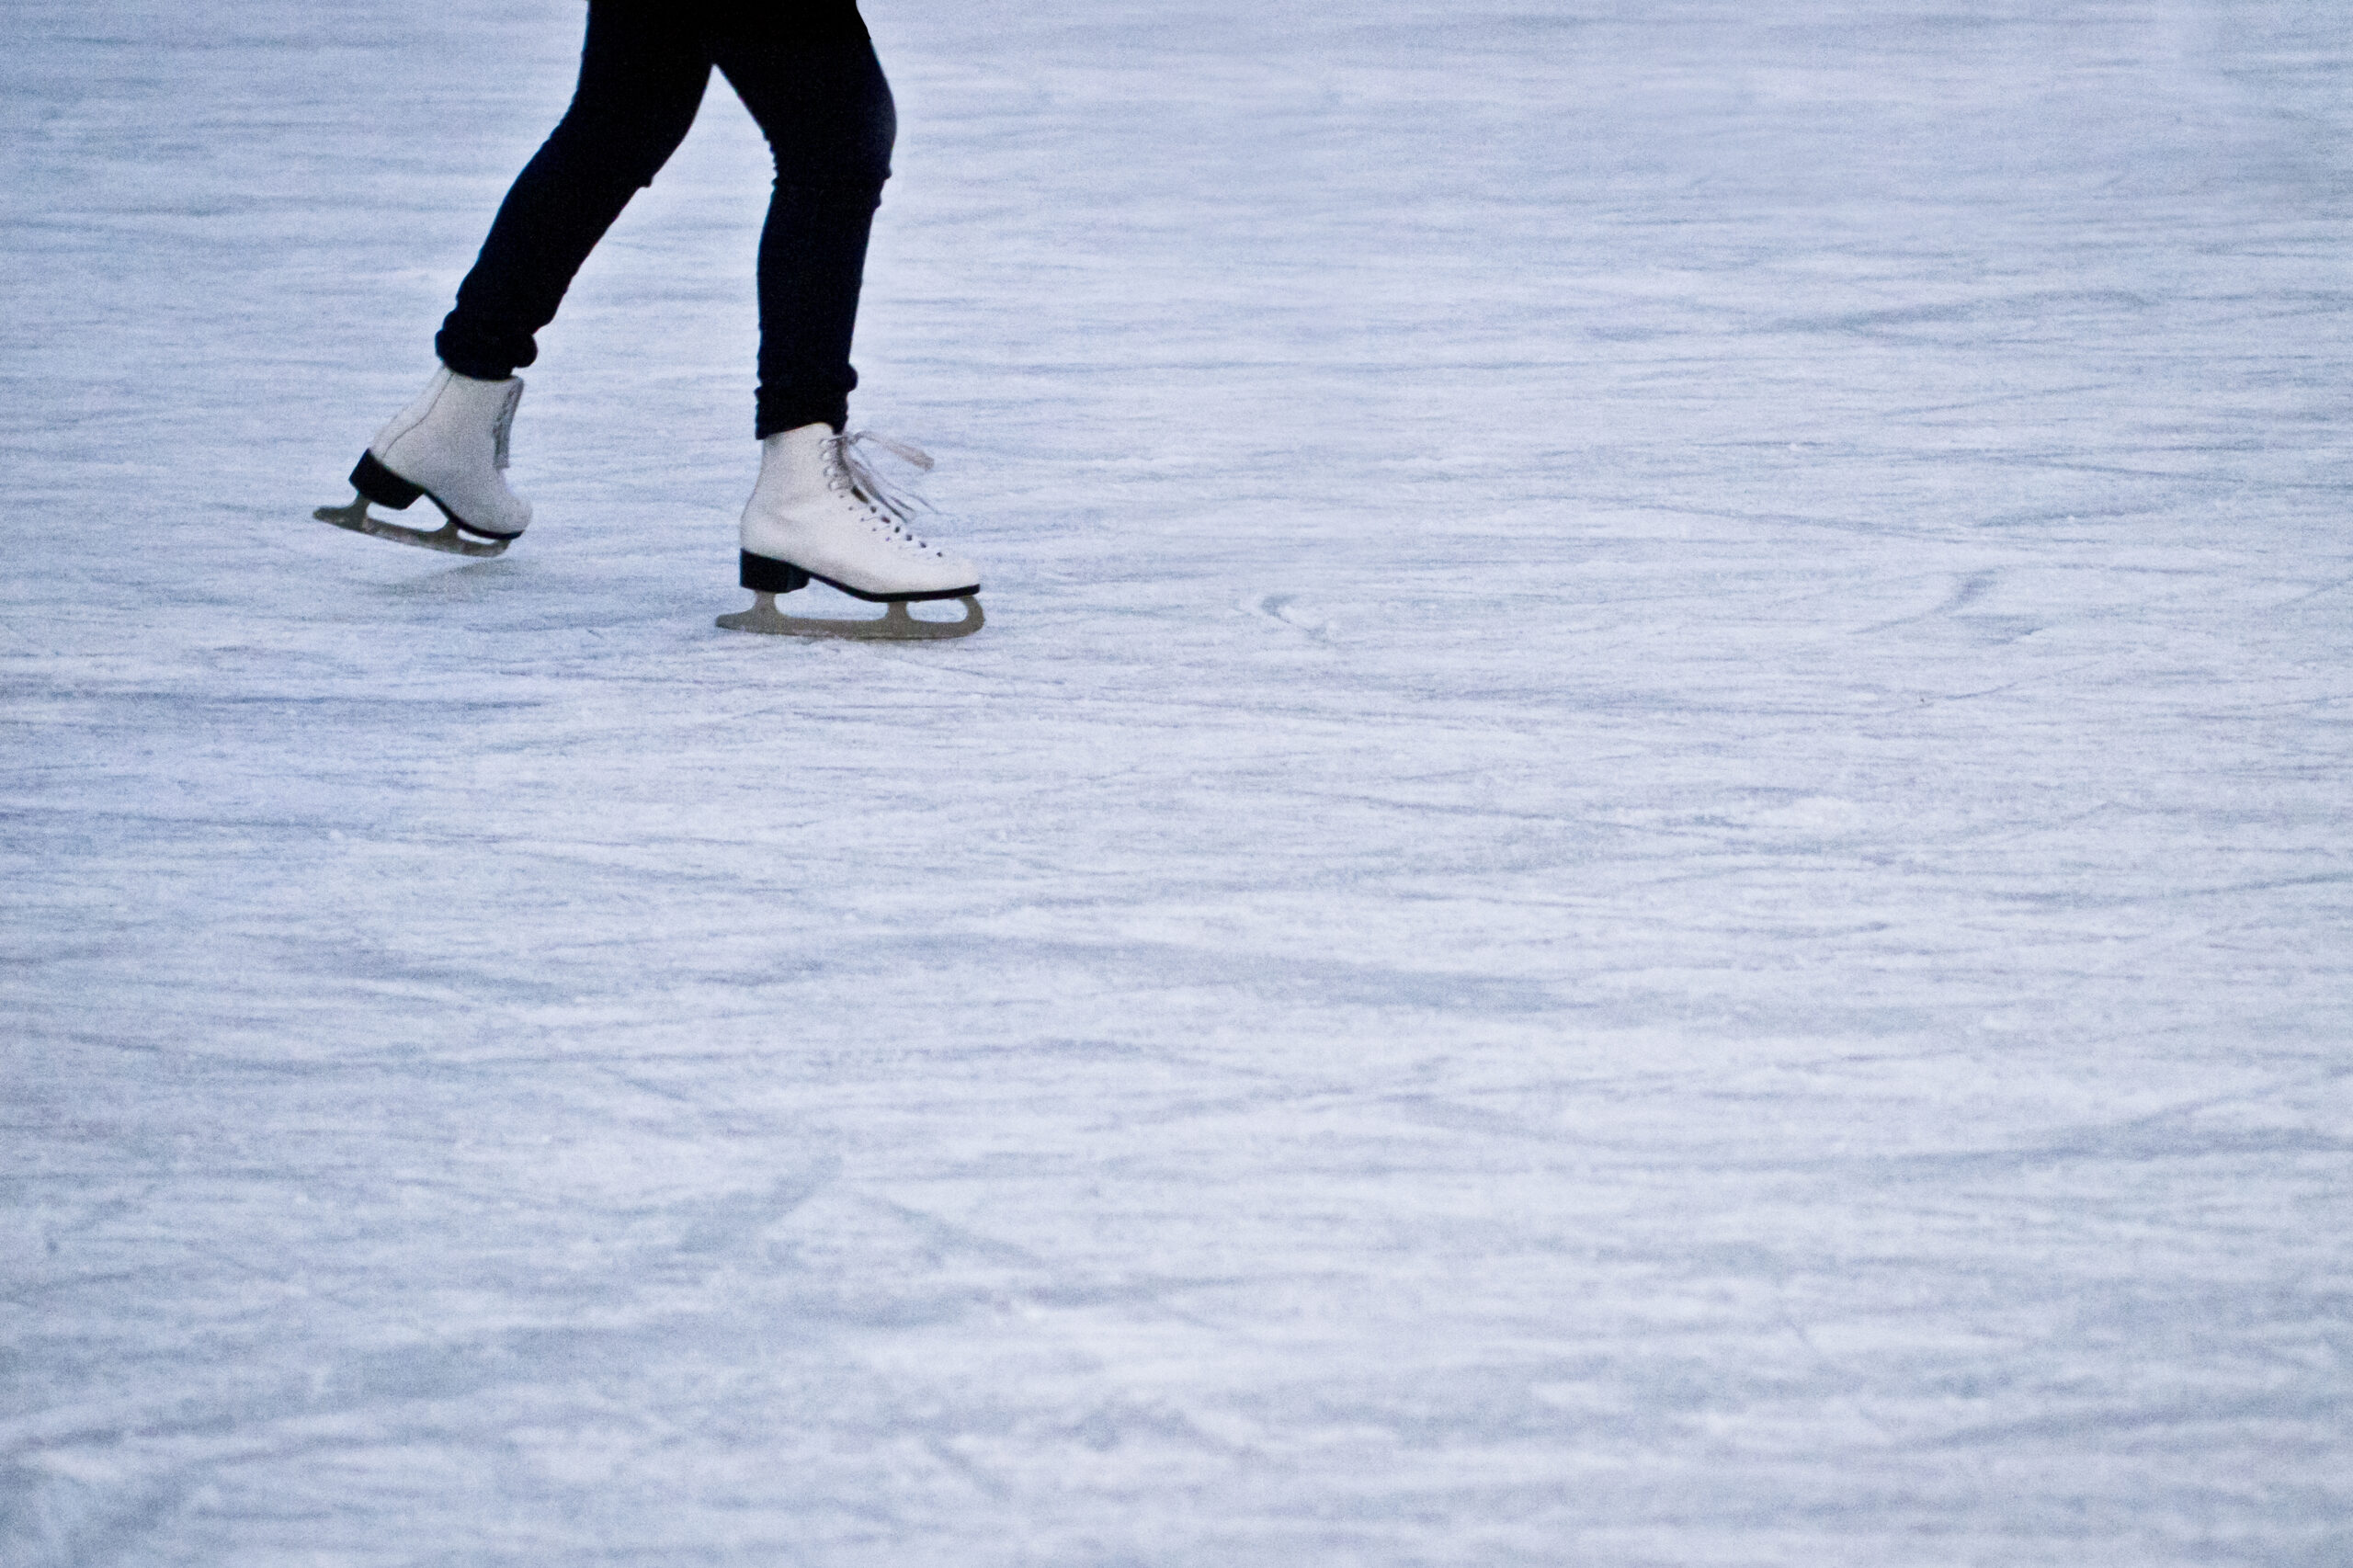 How is sideways ice skating different from normal ice skating?